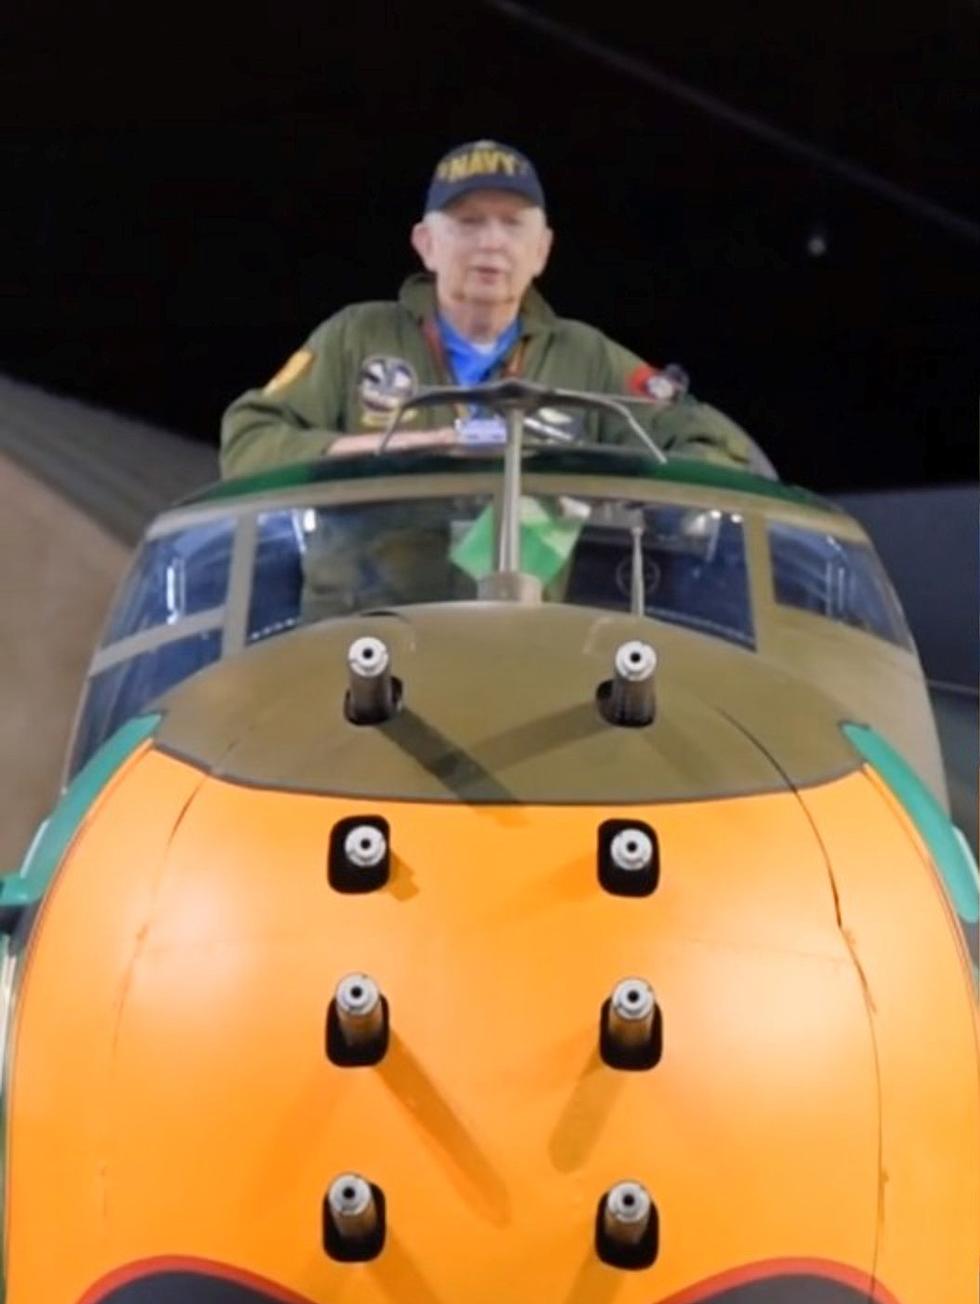 Kalamazoo Air Zoo Doesn’t Want You Making Out in Their Planes